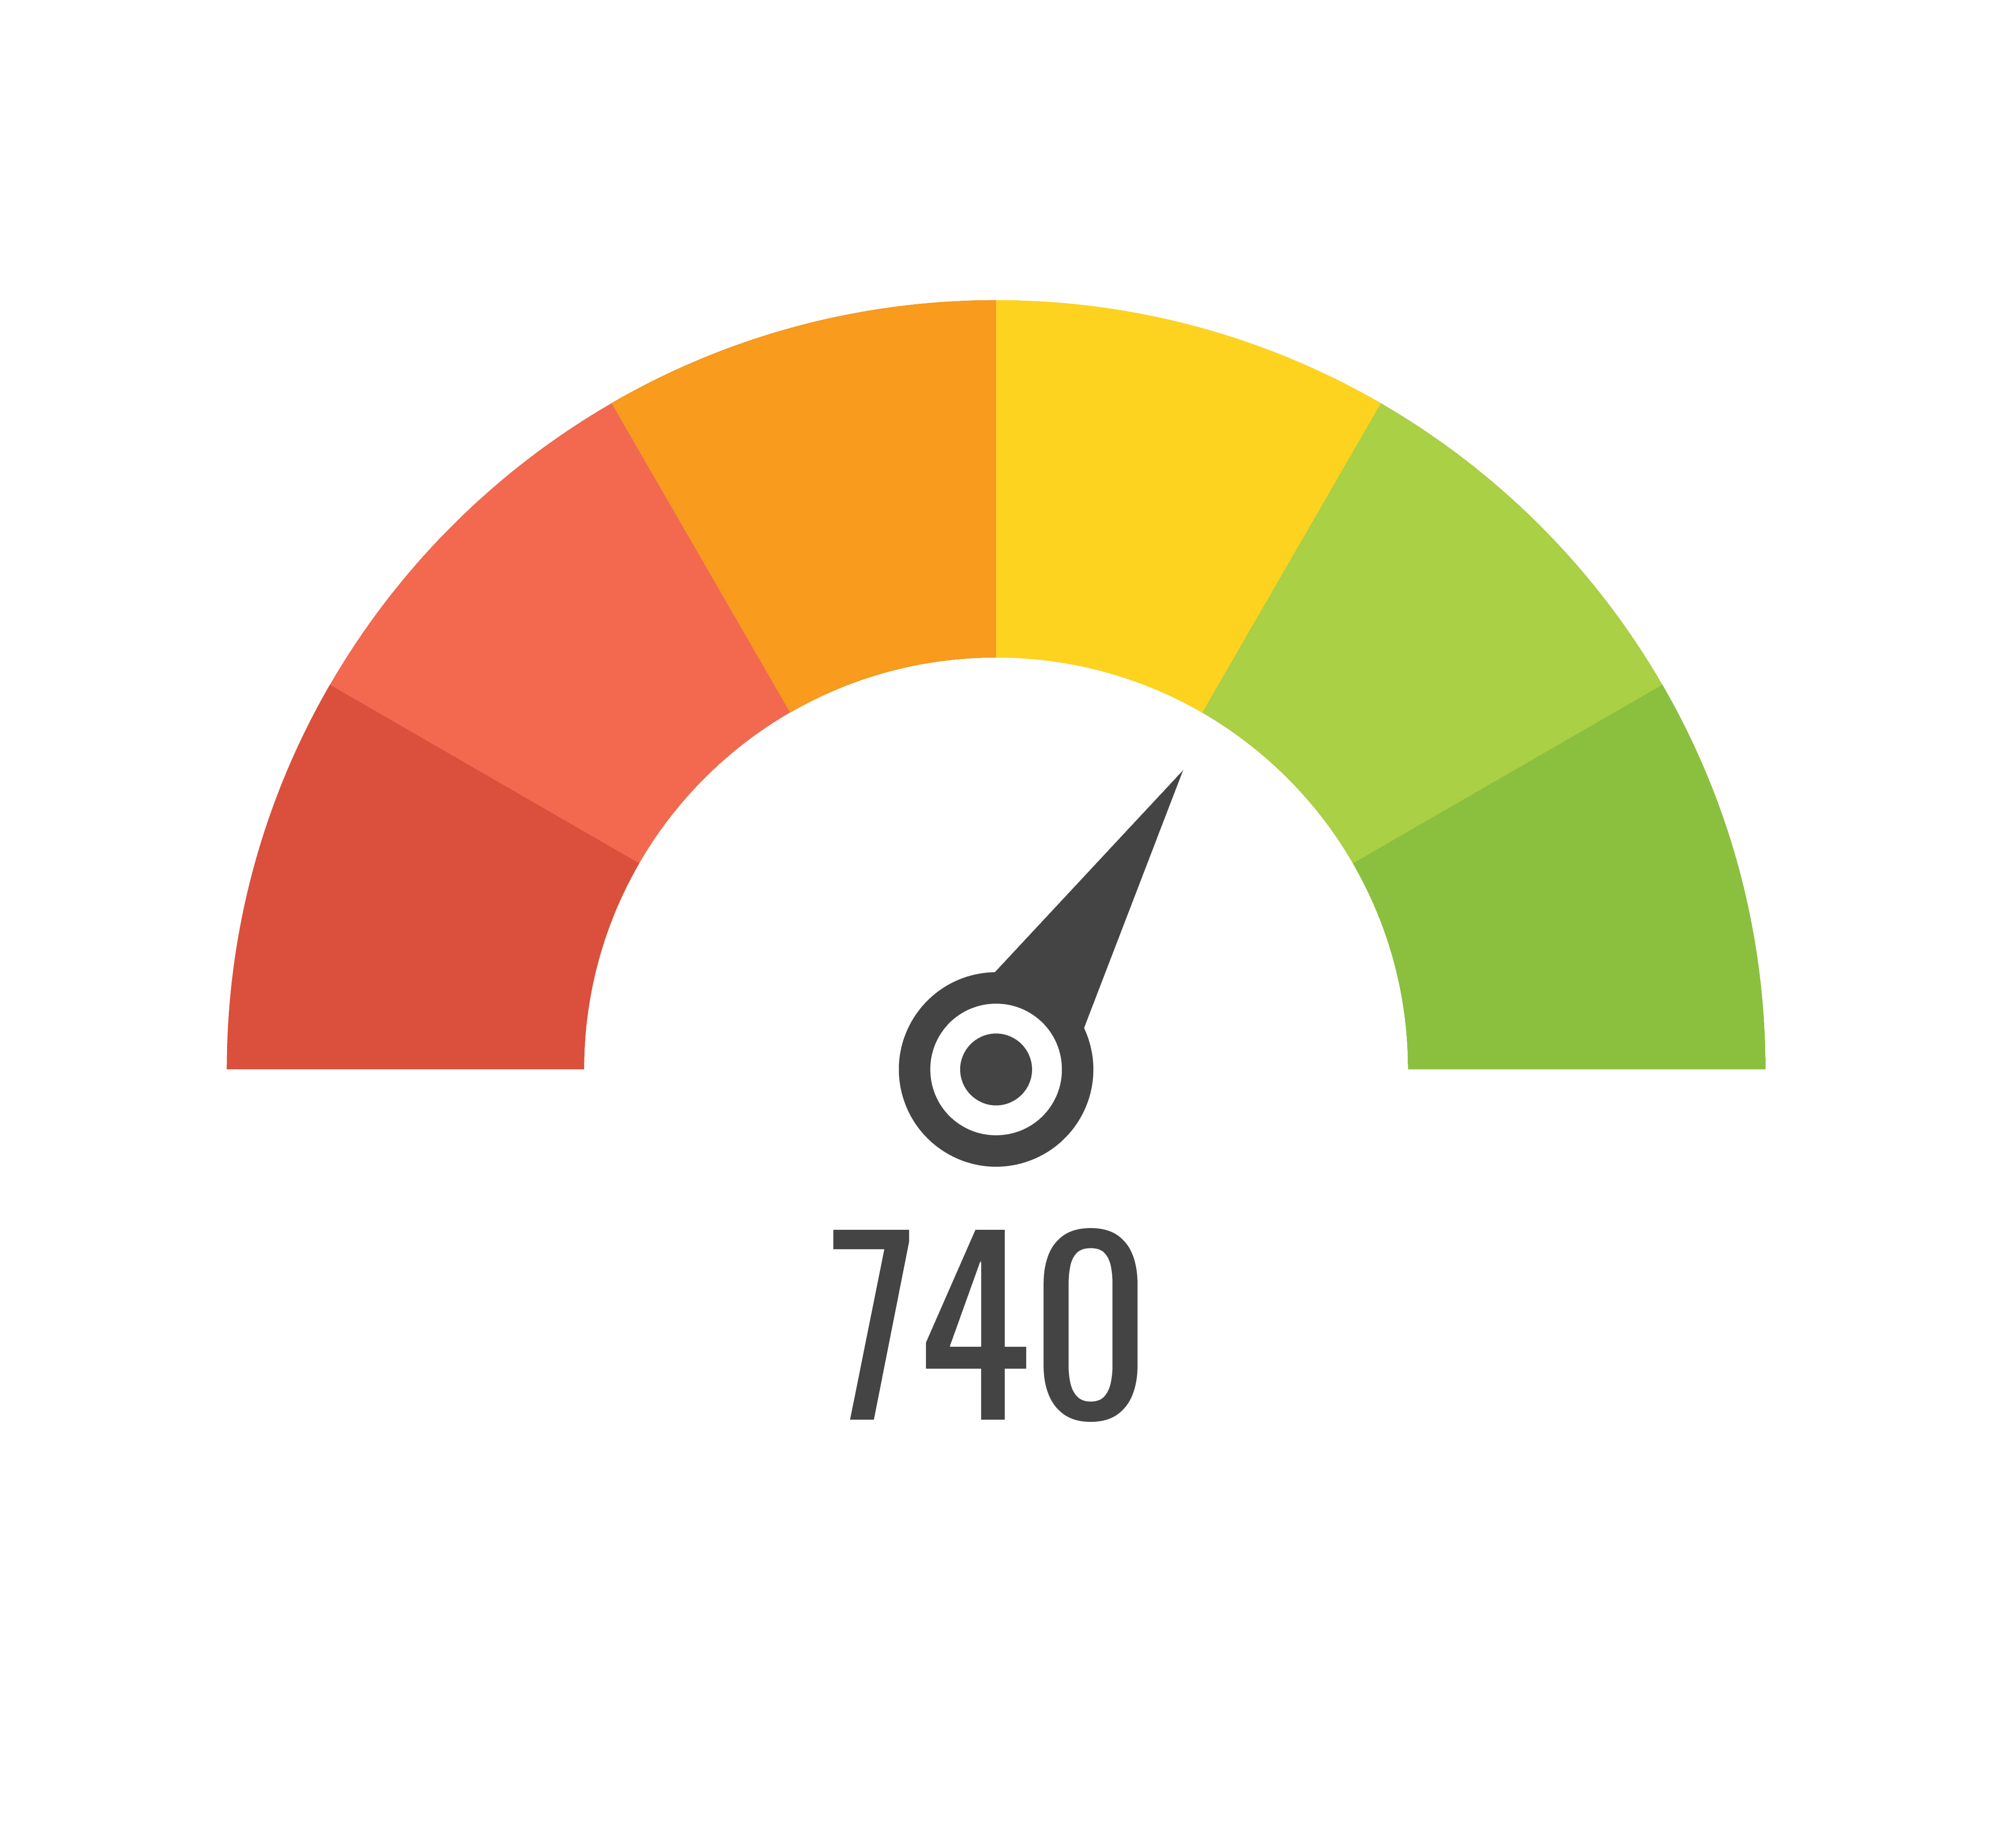 Graphic of credit score of 740